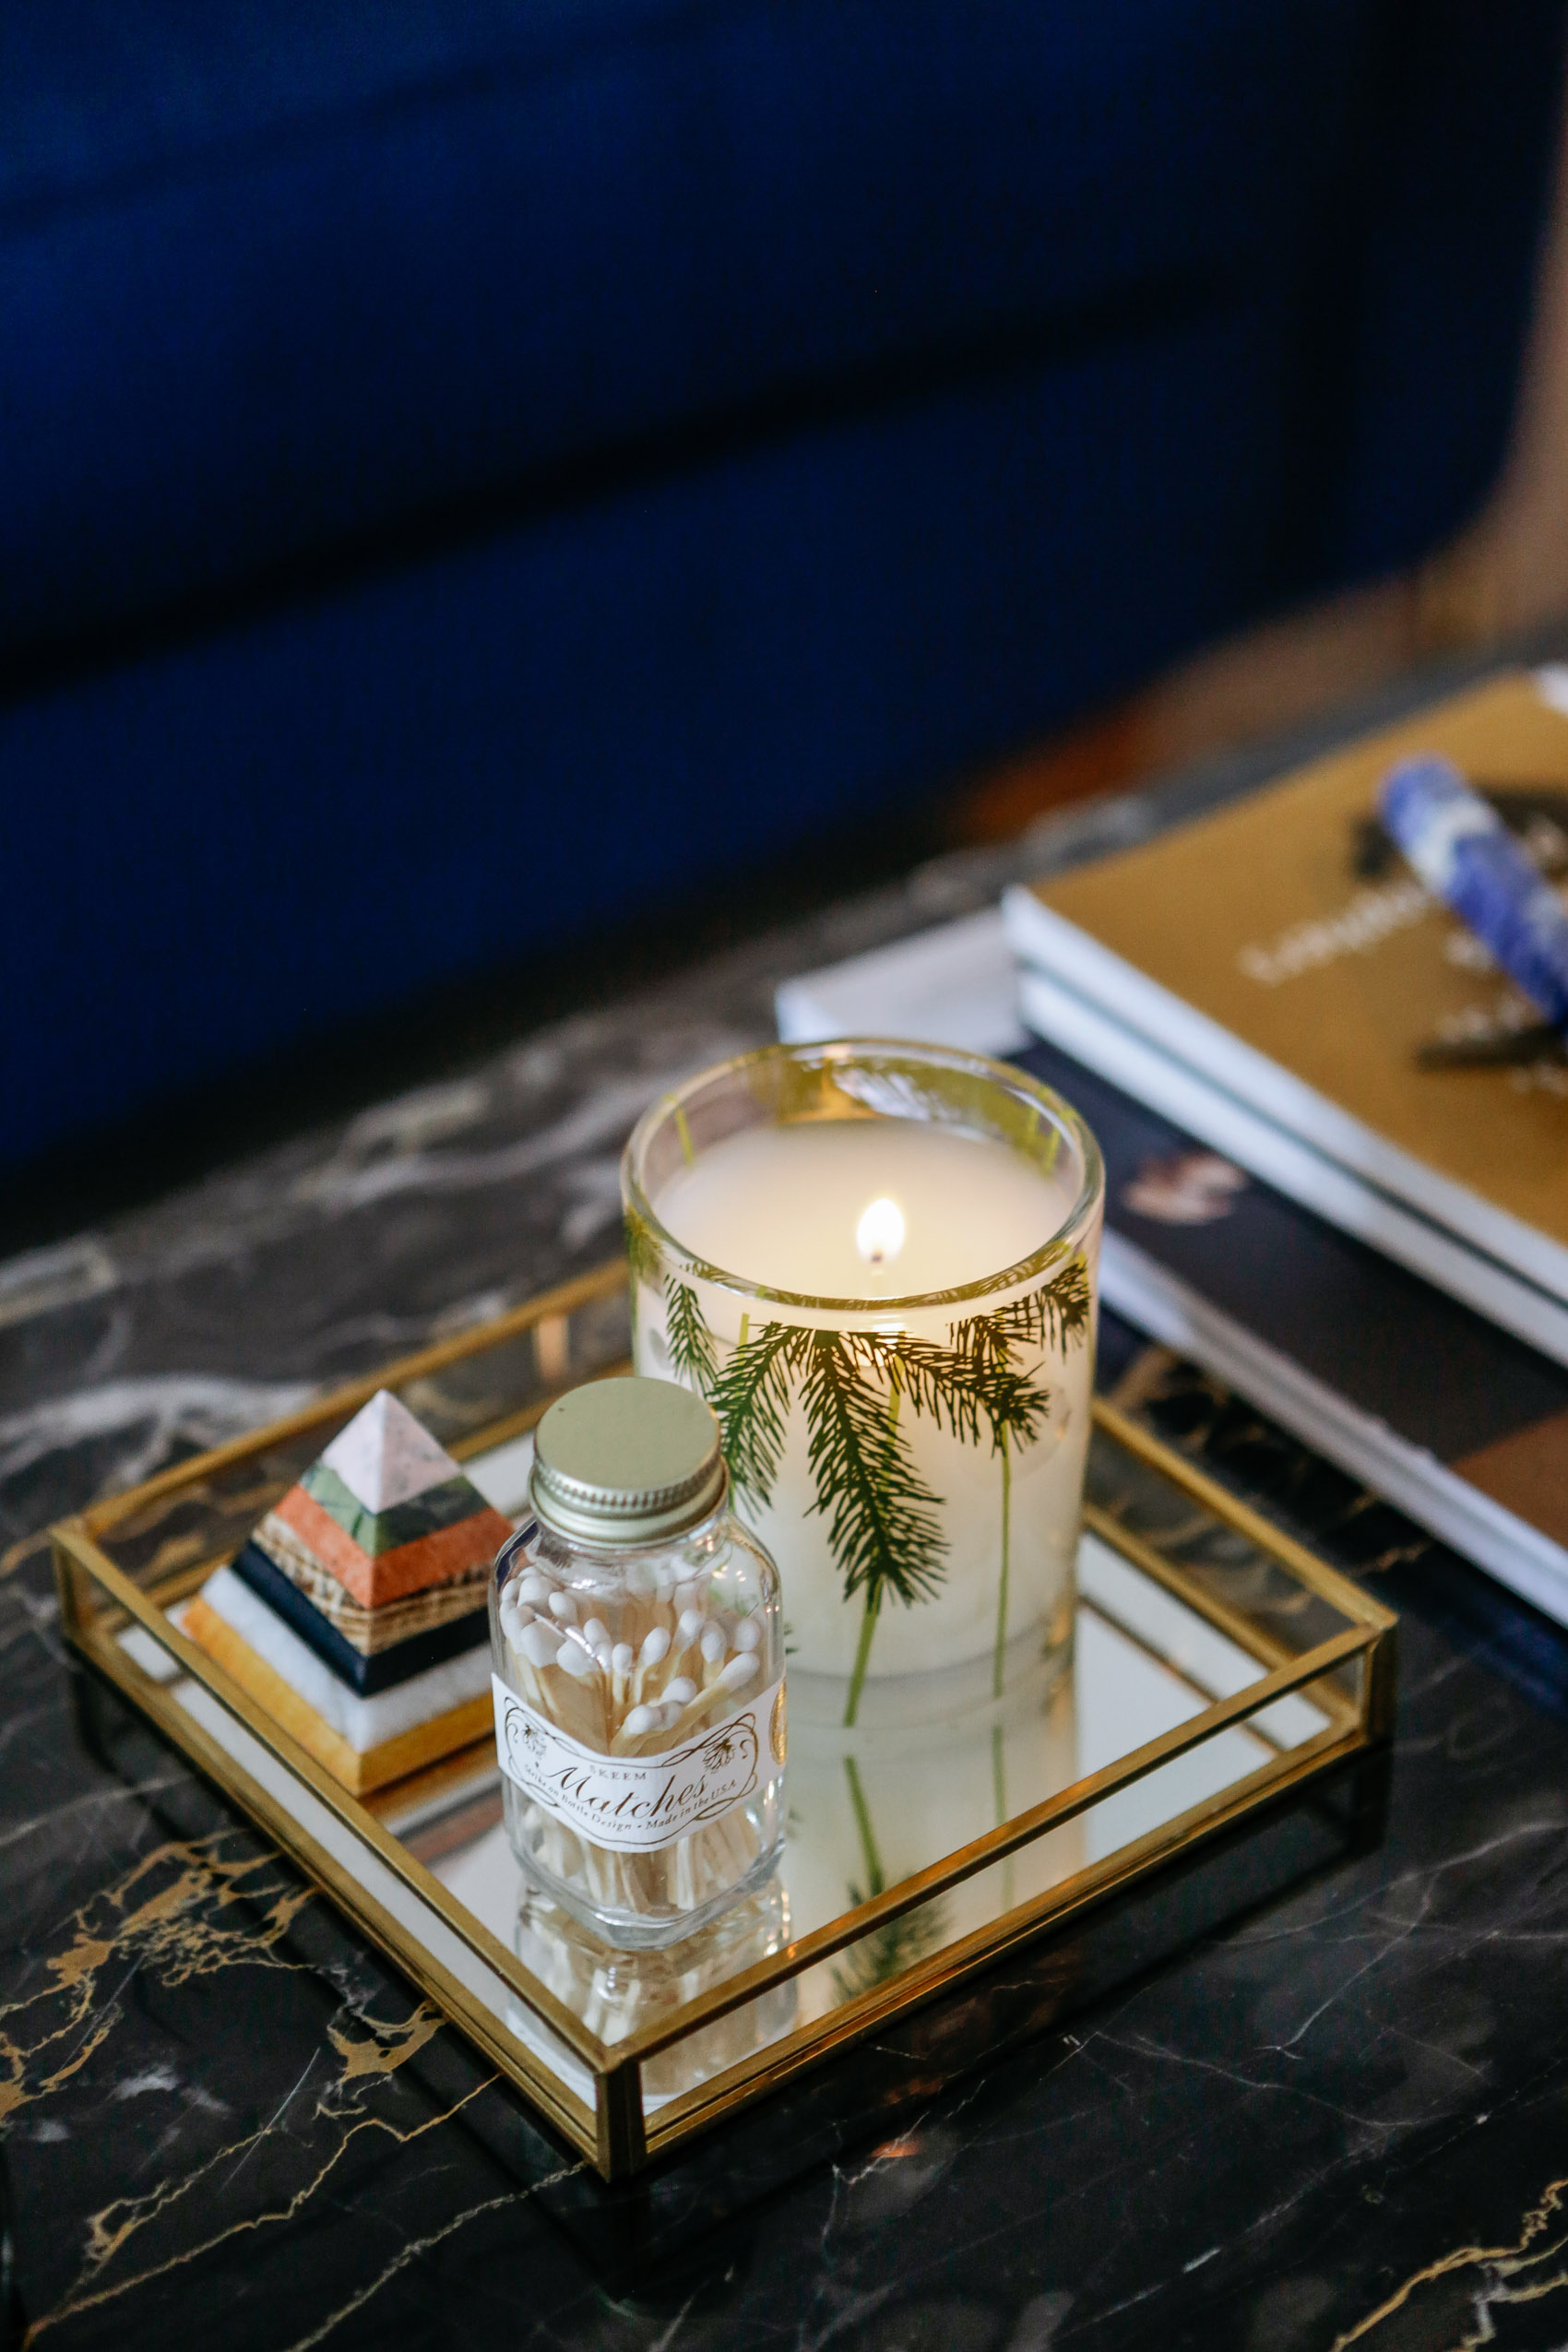 Mirrored tray decor on marble coffee table with strike on bottle matches and Thymes Frasier Fir candle